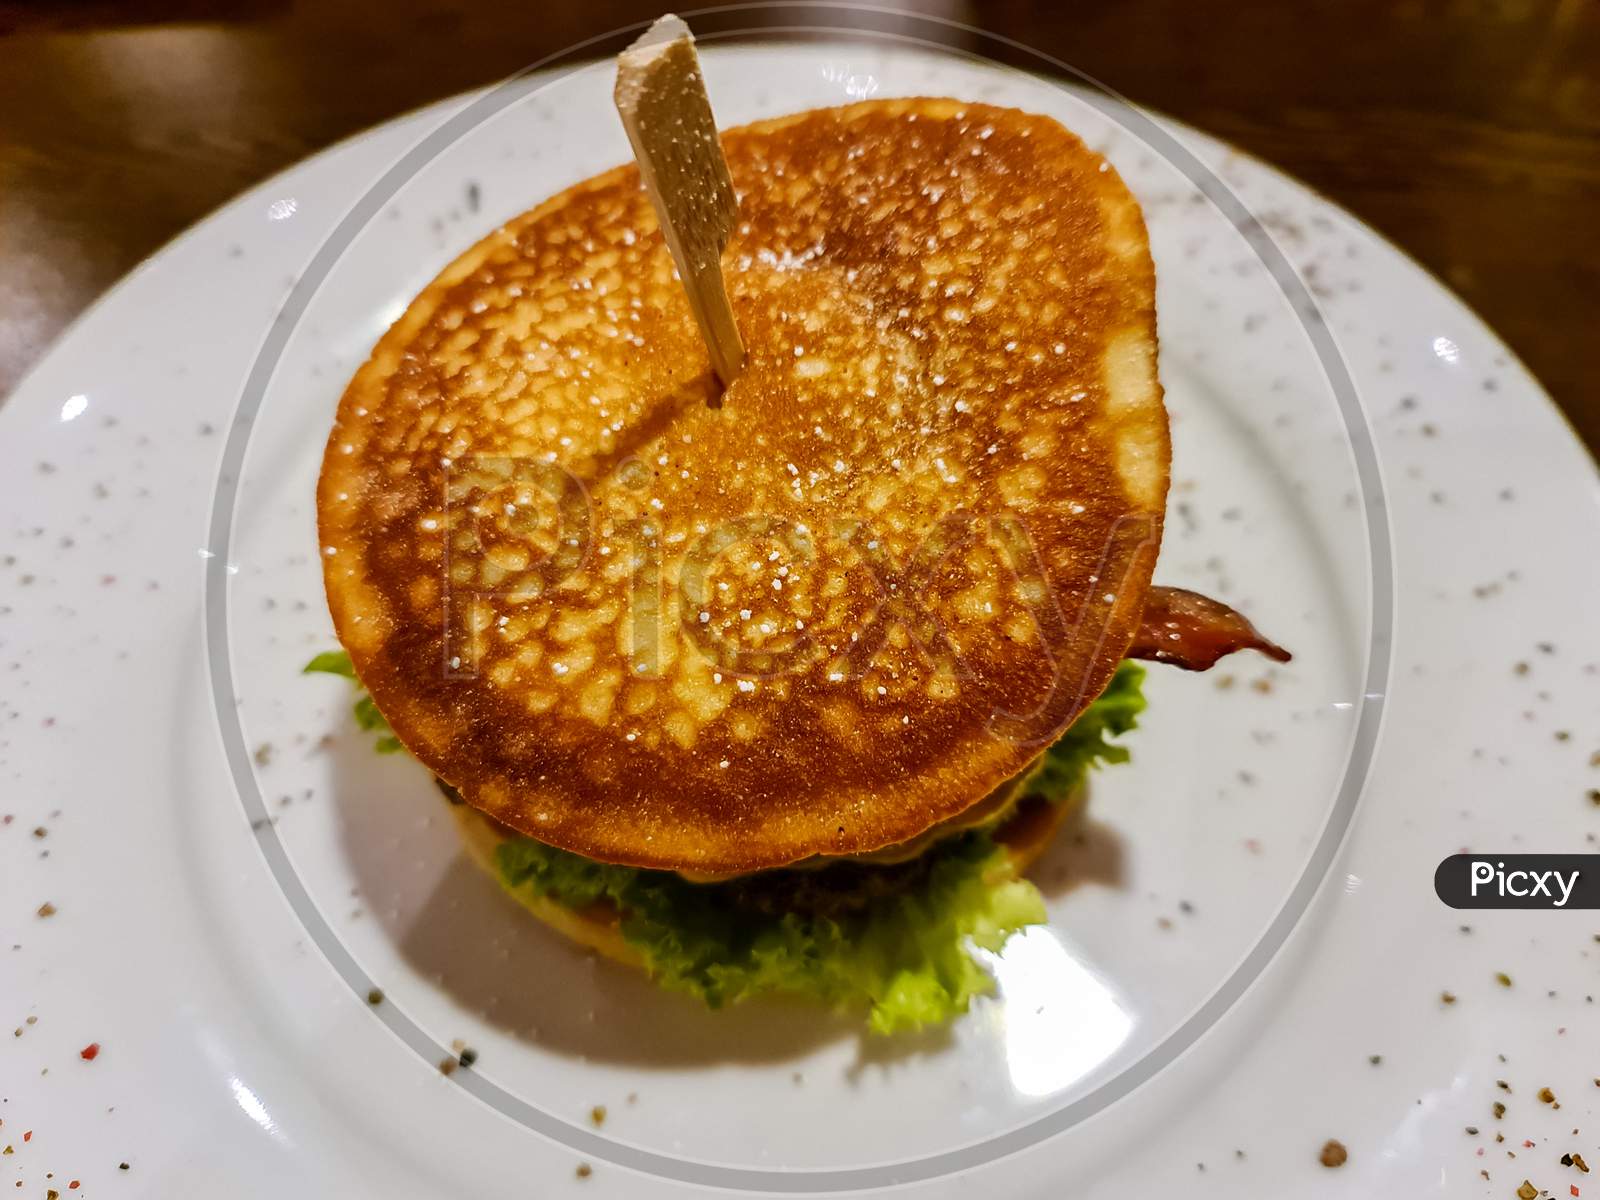 A Tasty Grilled Burger With Tomatoes And Salad On A White Plate